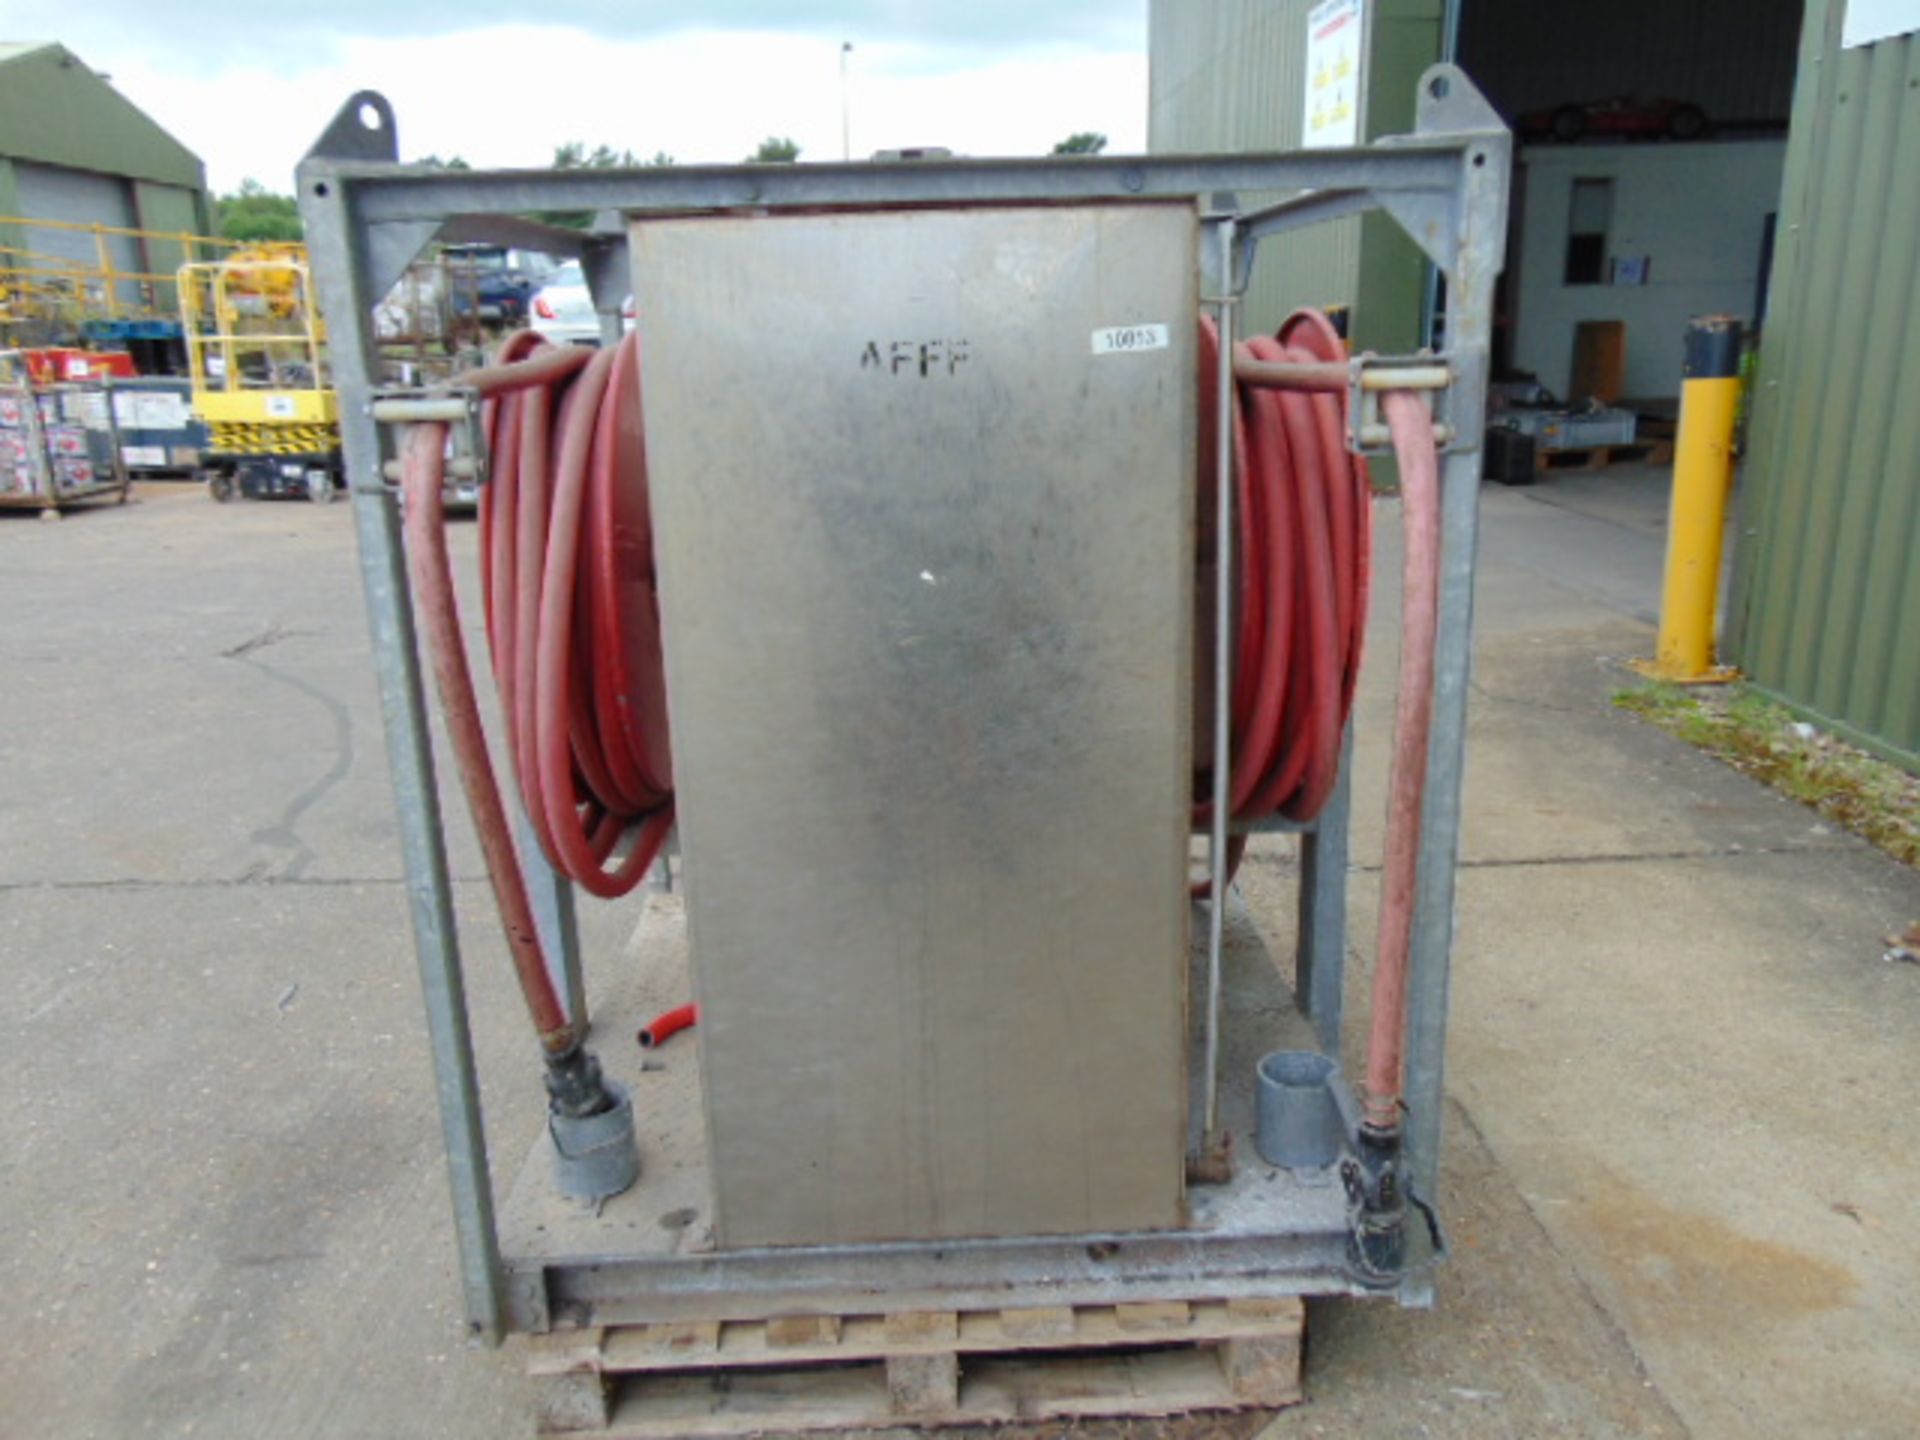 700L Fireater AFFF (Aqueous Film-Forming Foam) stainless steelTanks c/w 2 x 10m Fire Hose Reels. - Image 4 of 10